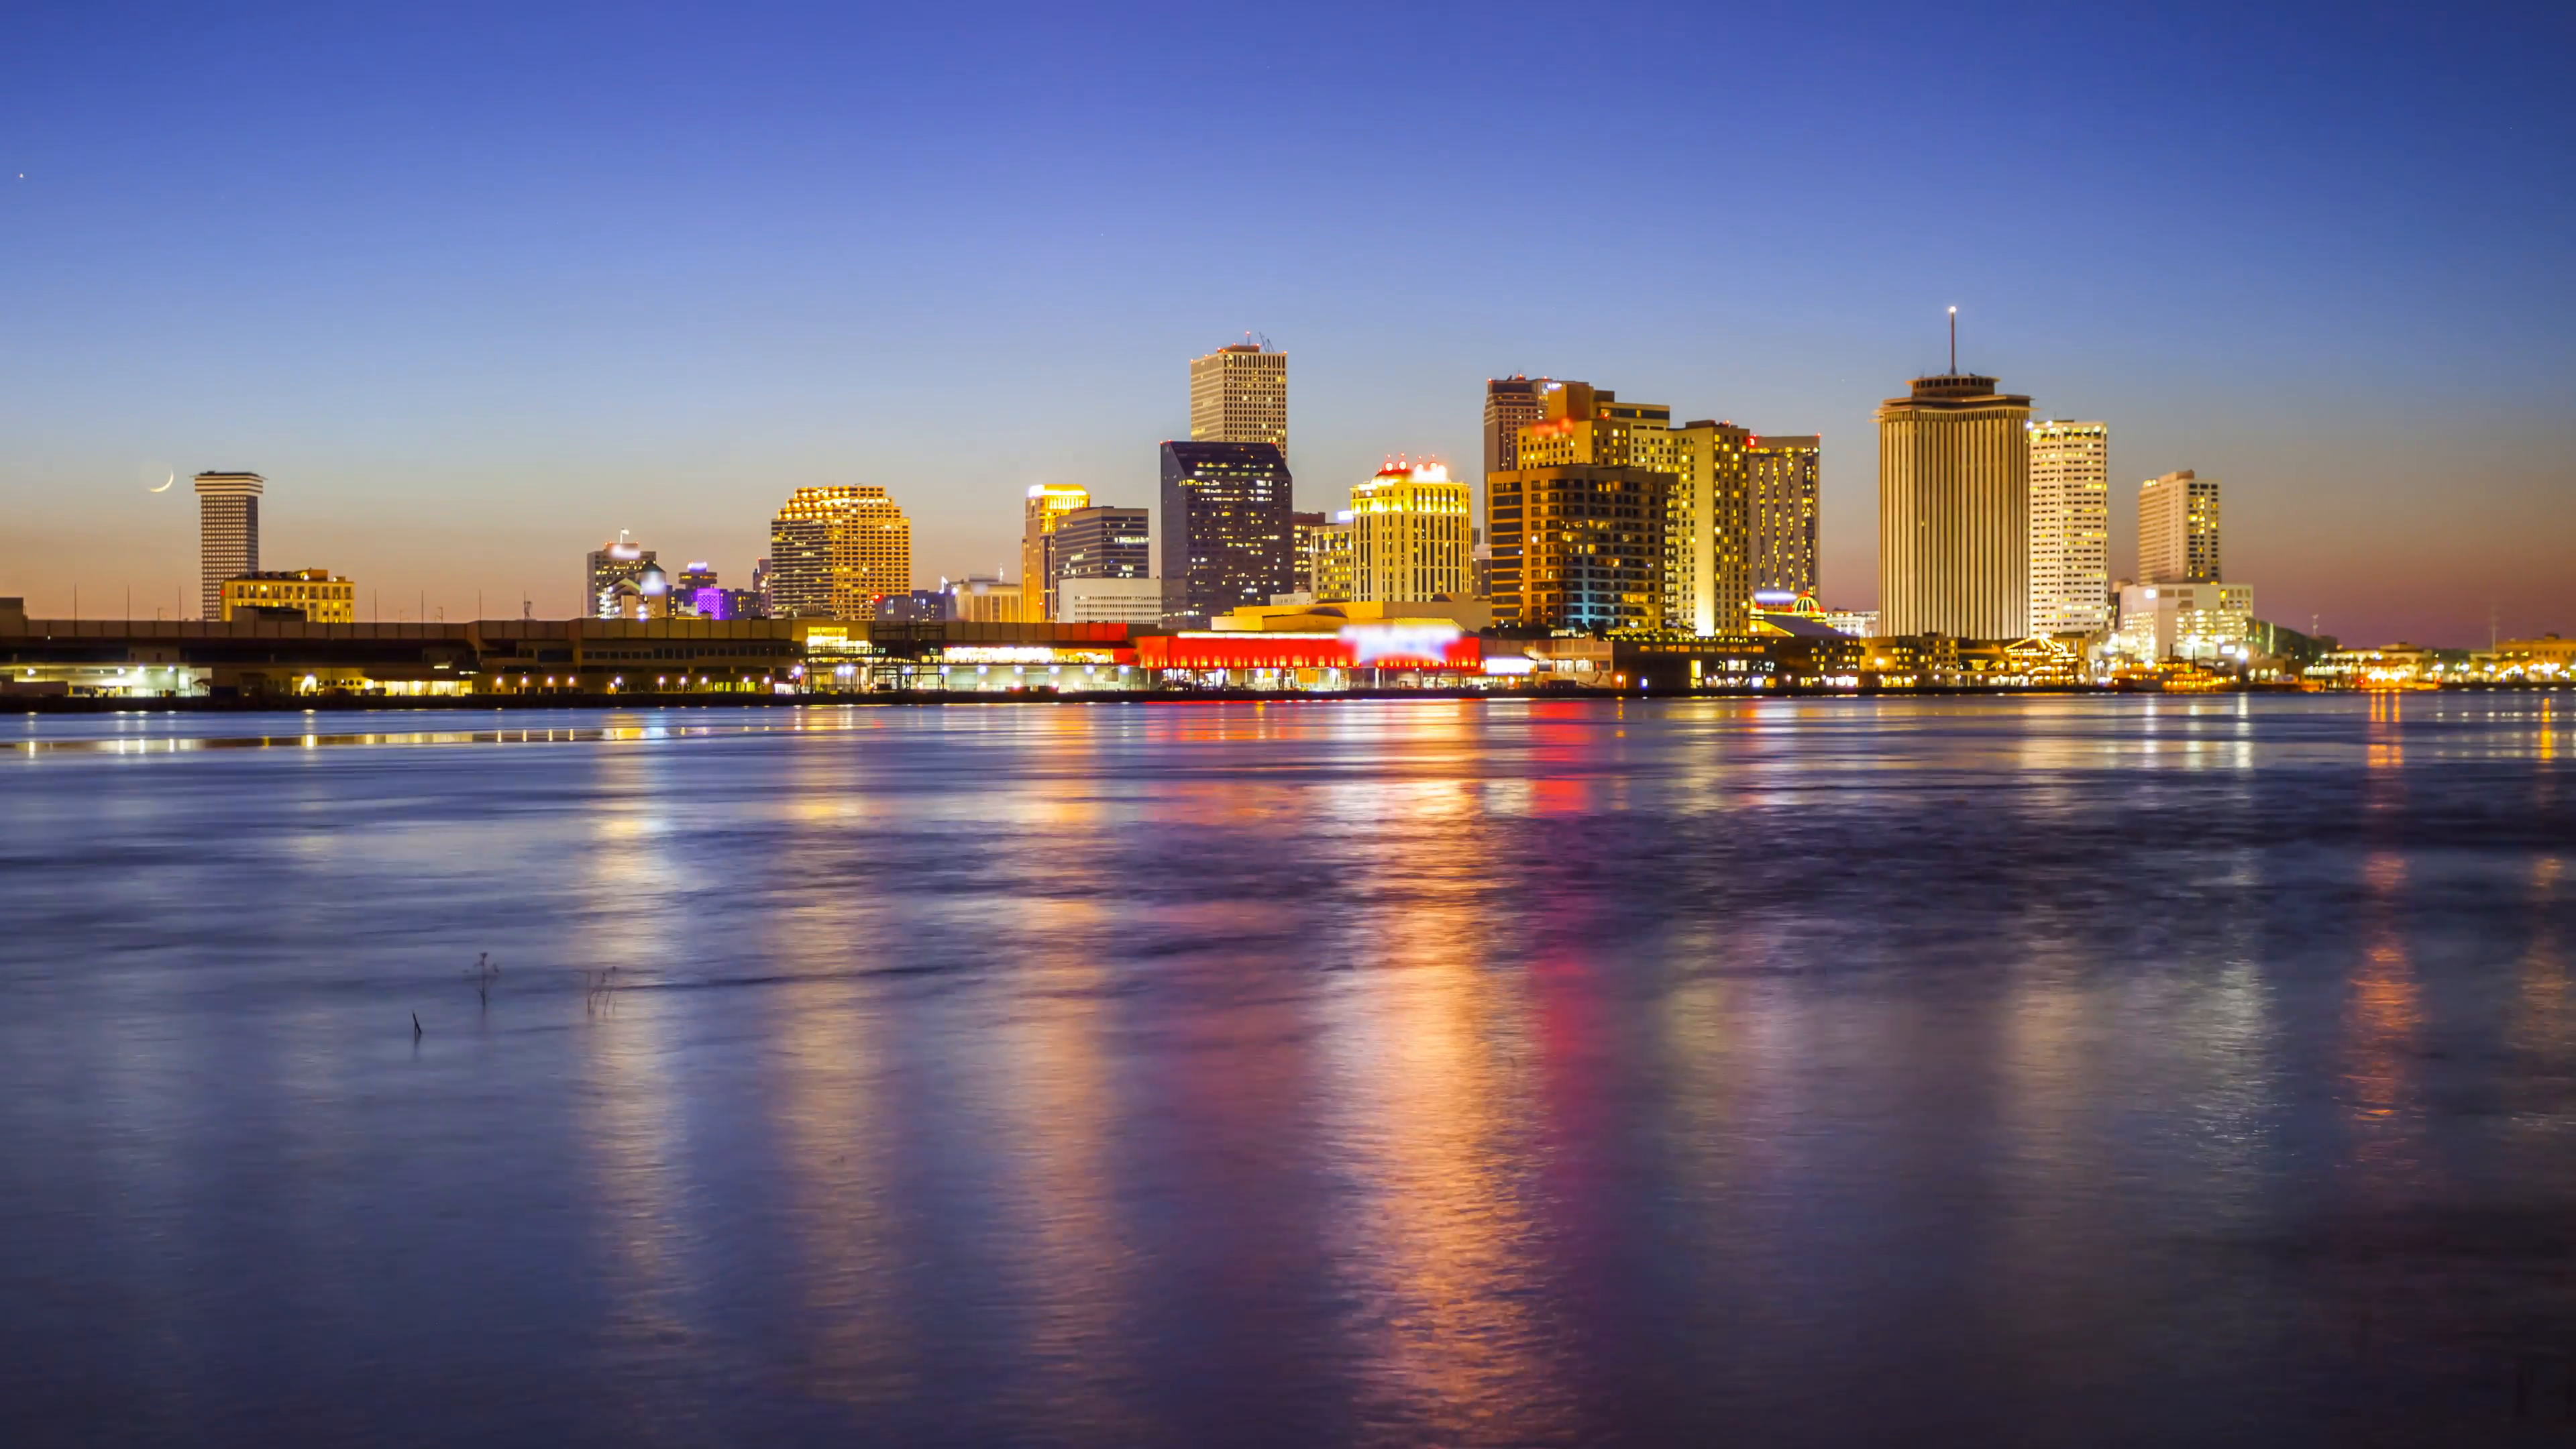 Skyline of New Orleans Across the Mississippi River - Day to Night ...